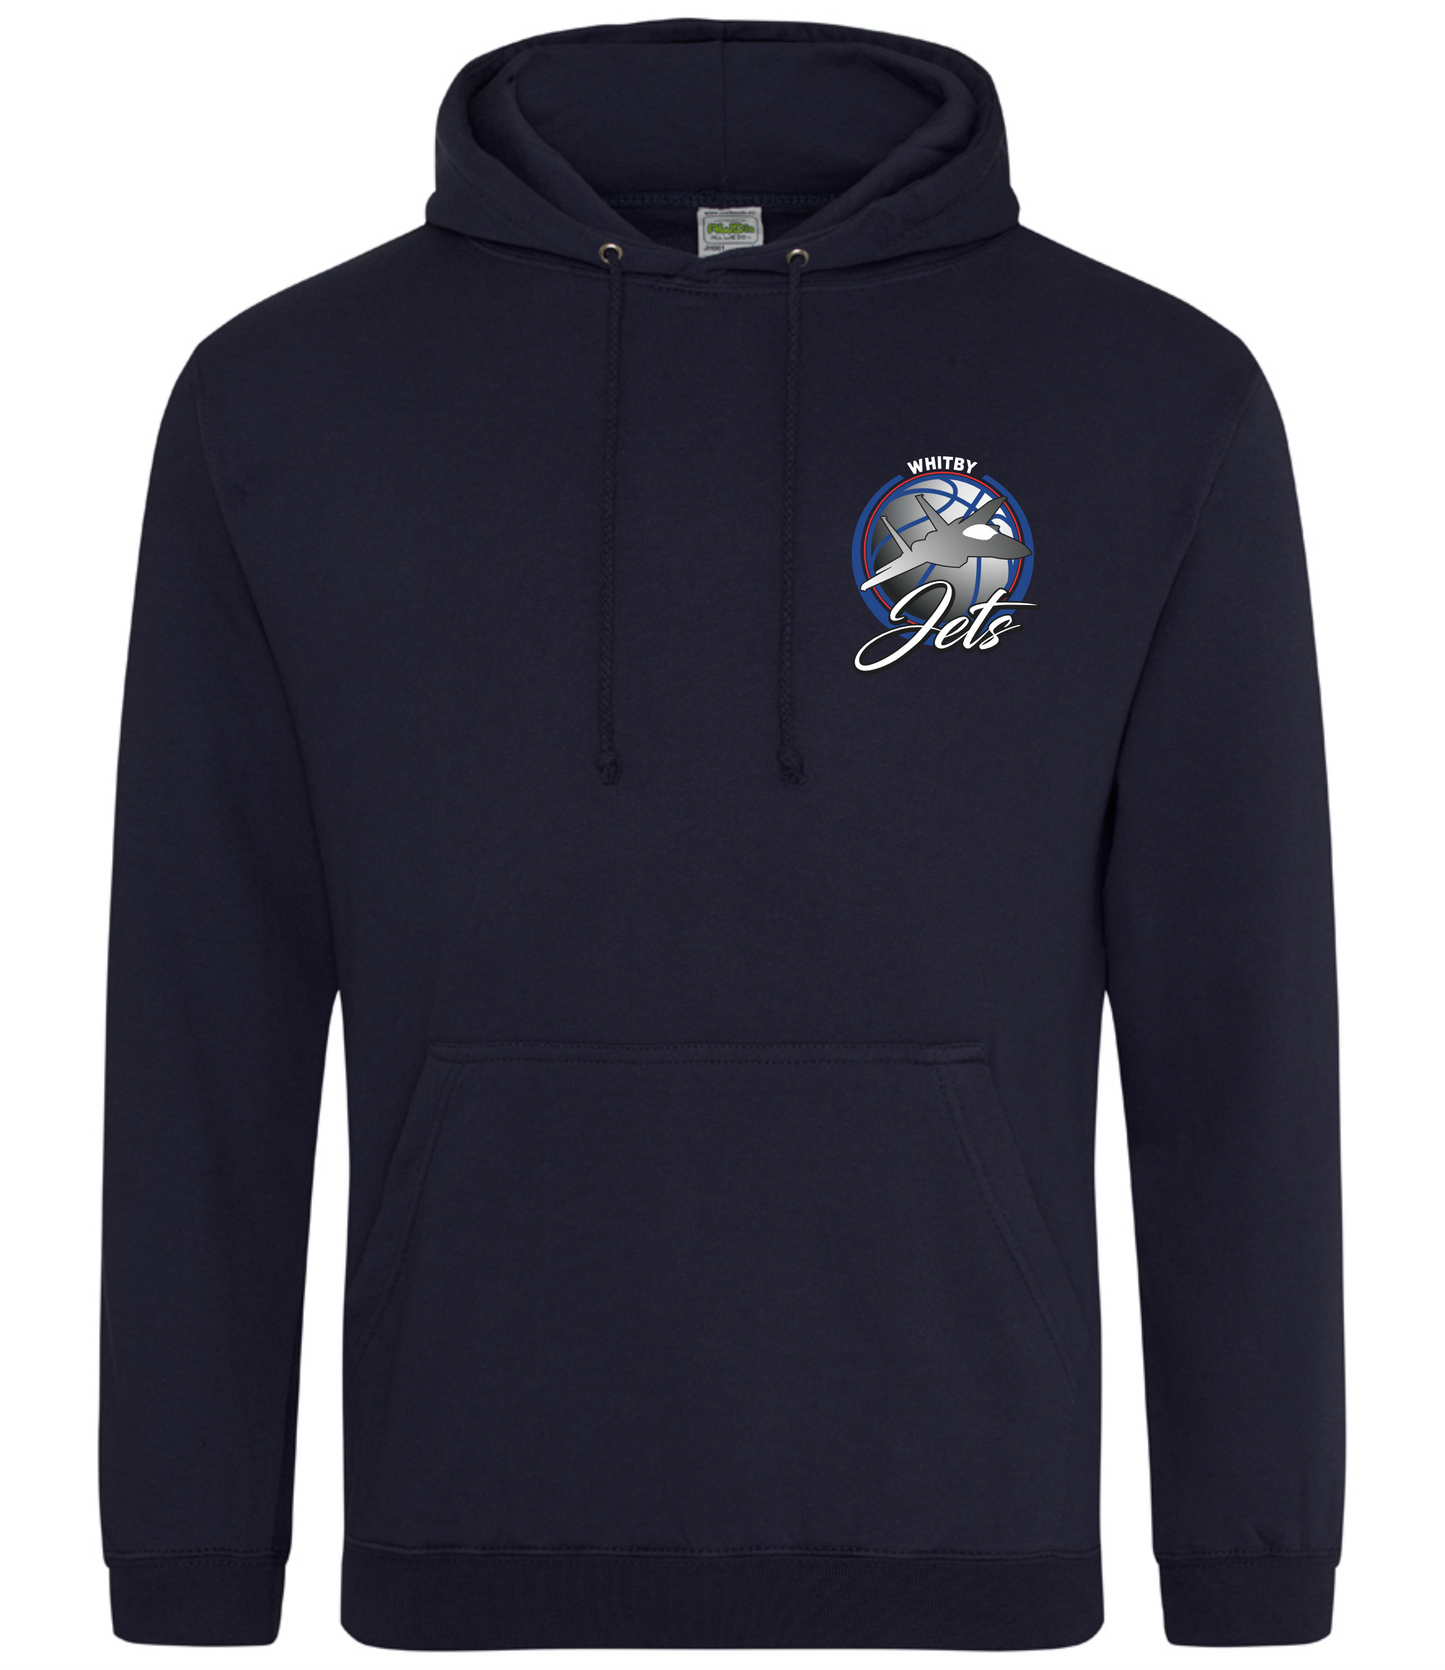 Whitby Jets Kids Hoodie | New French Navy